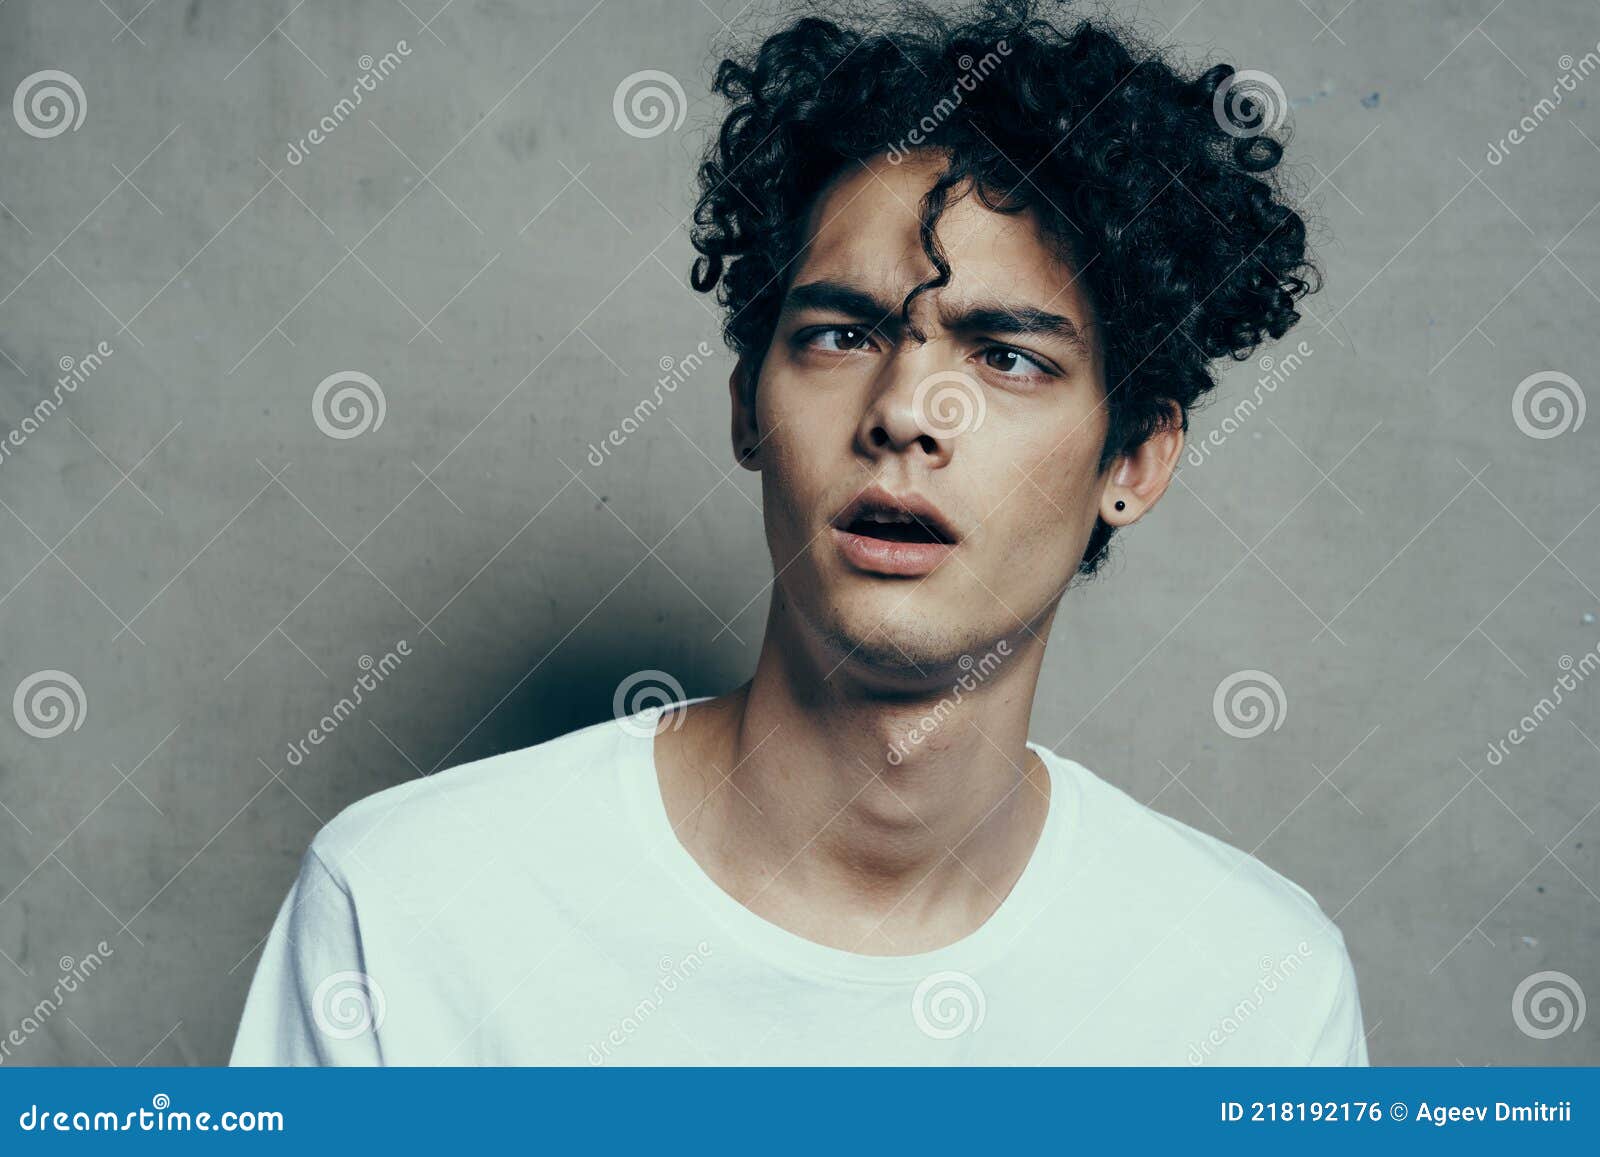 Portrait of a Handsome Guy with Curly Hair on a Gray Background White  T-shirt Close-up Model Stock Photo - Image of anatomy, massage: 218192176